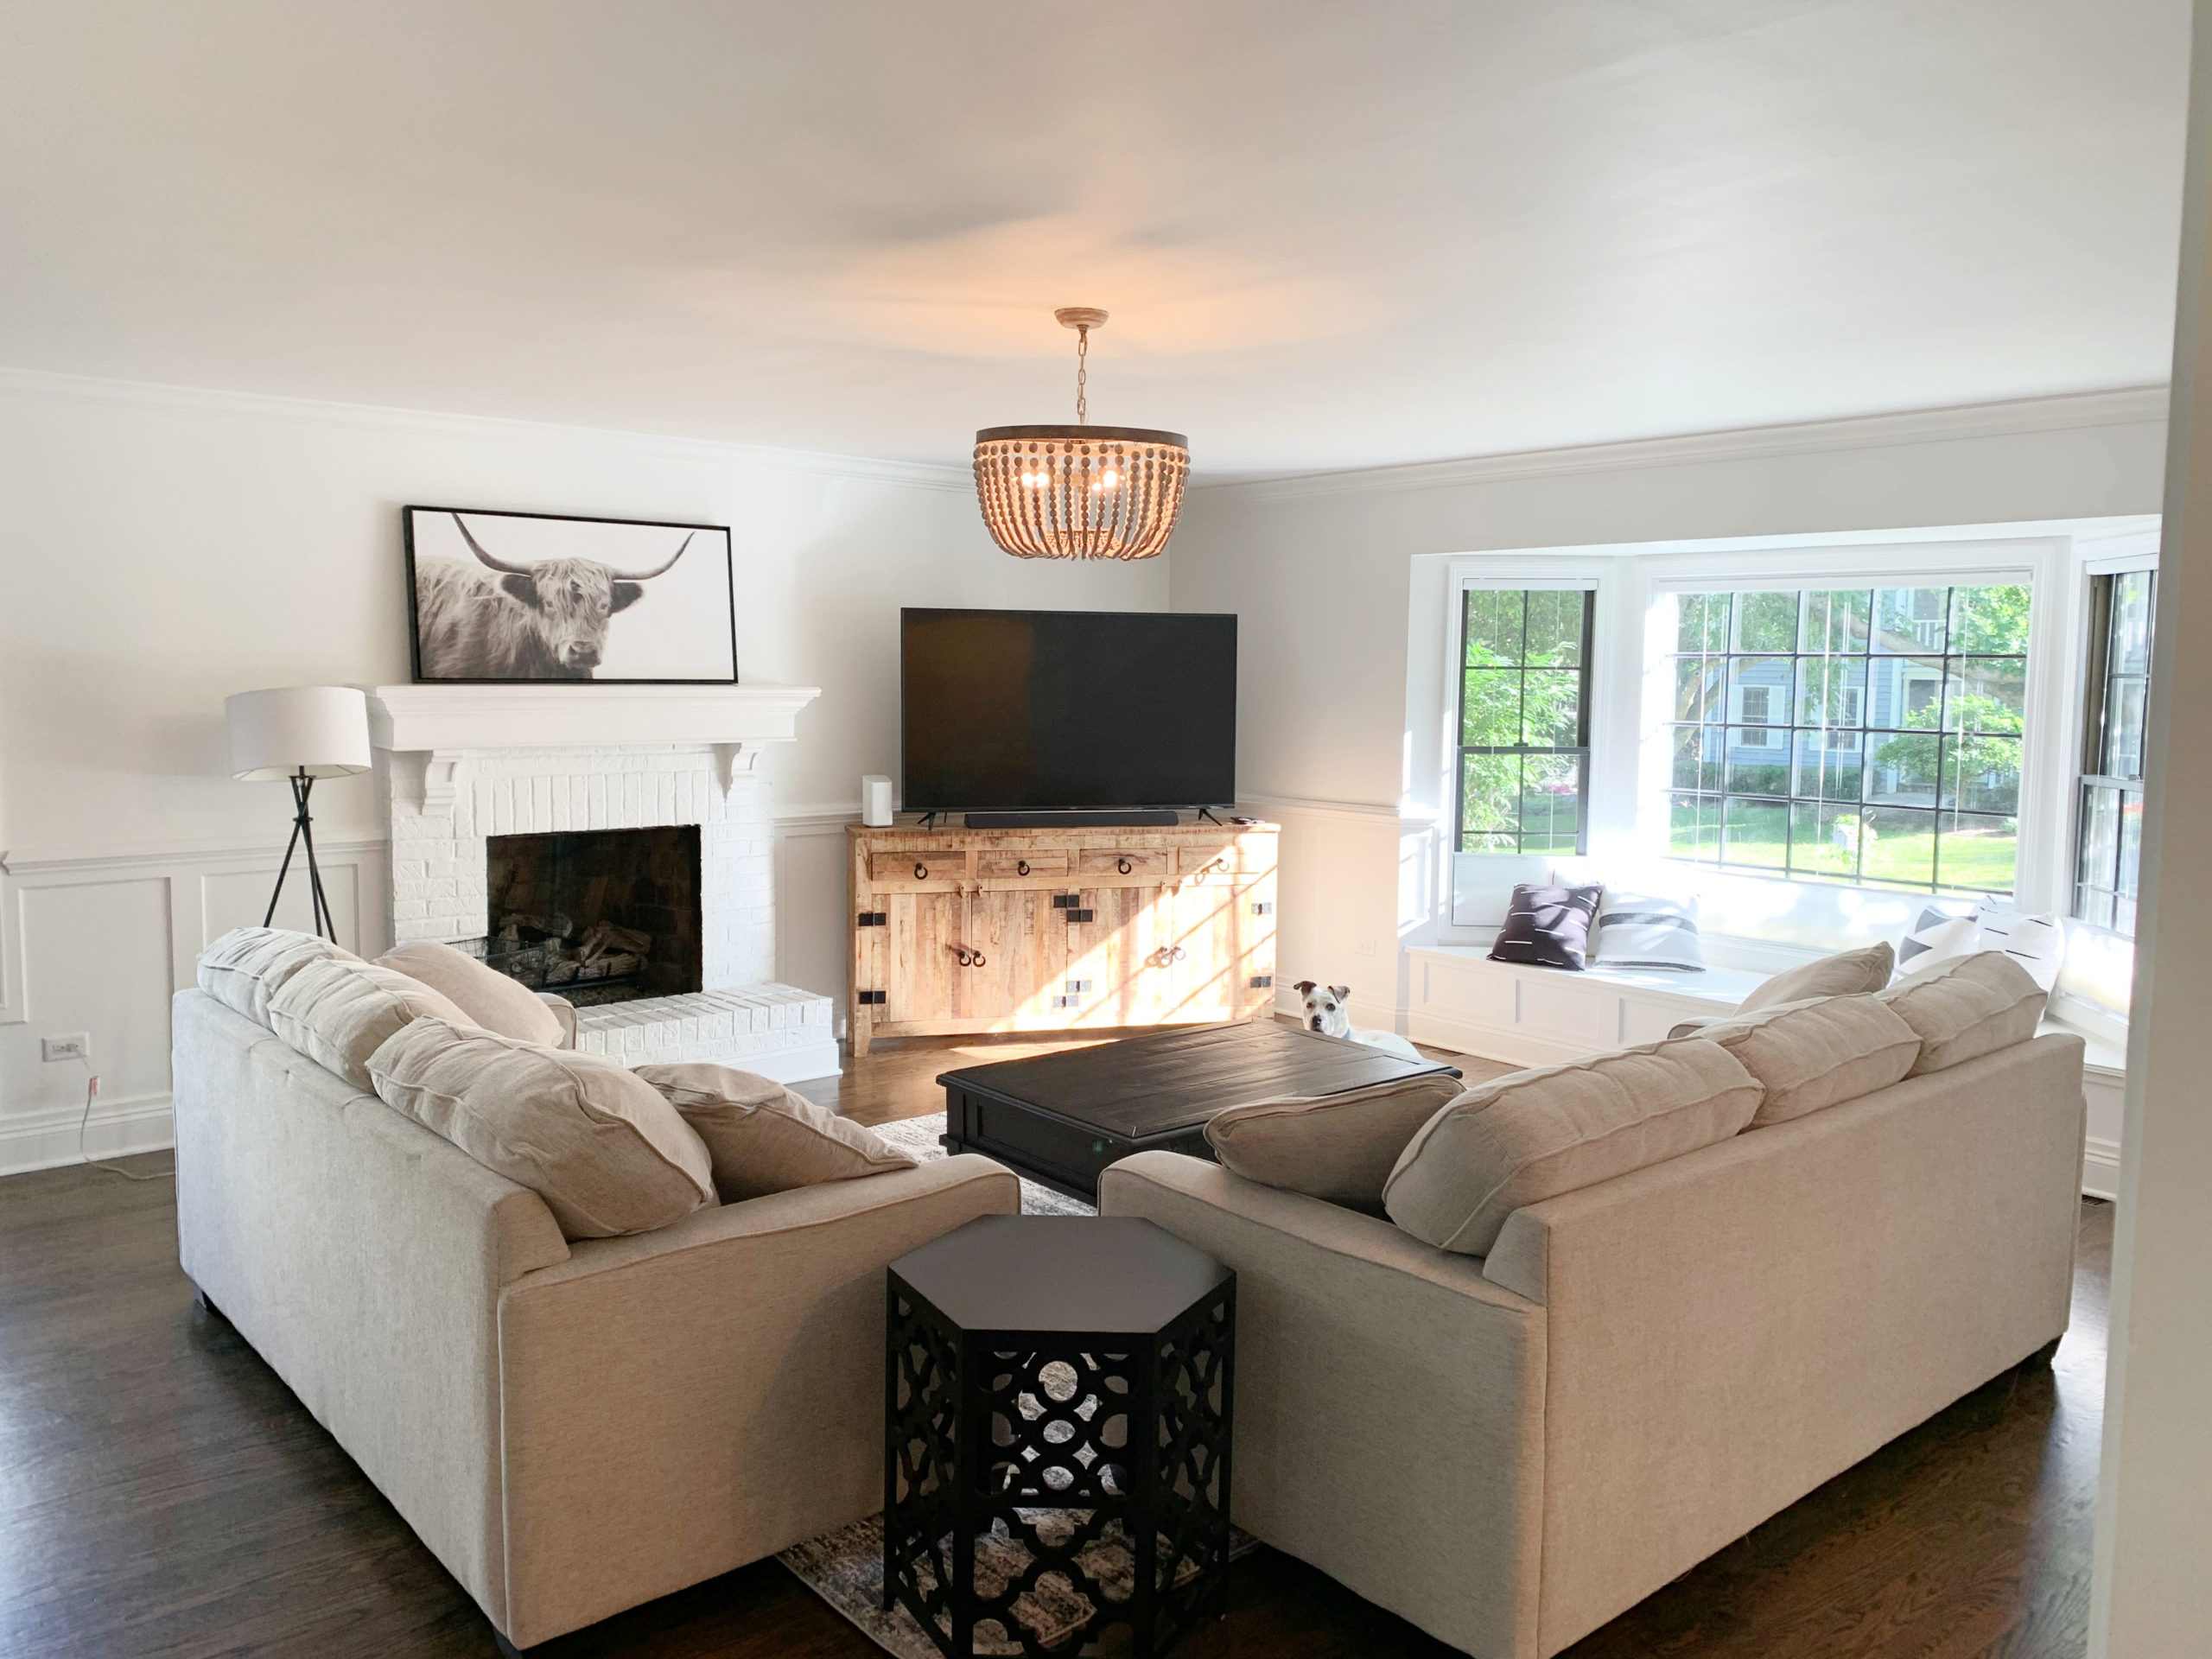 Sherwin Williams Pure White Sw 7005, Best Warm White For Living Room